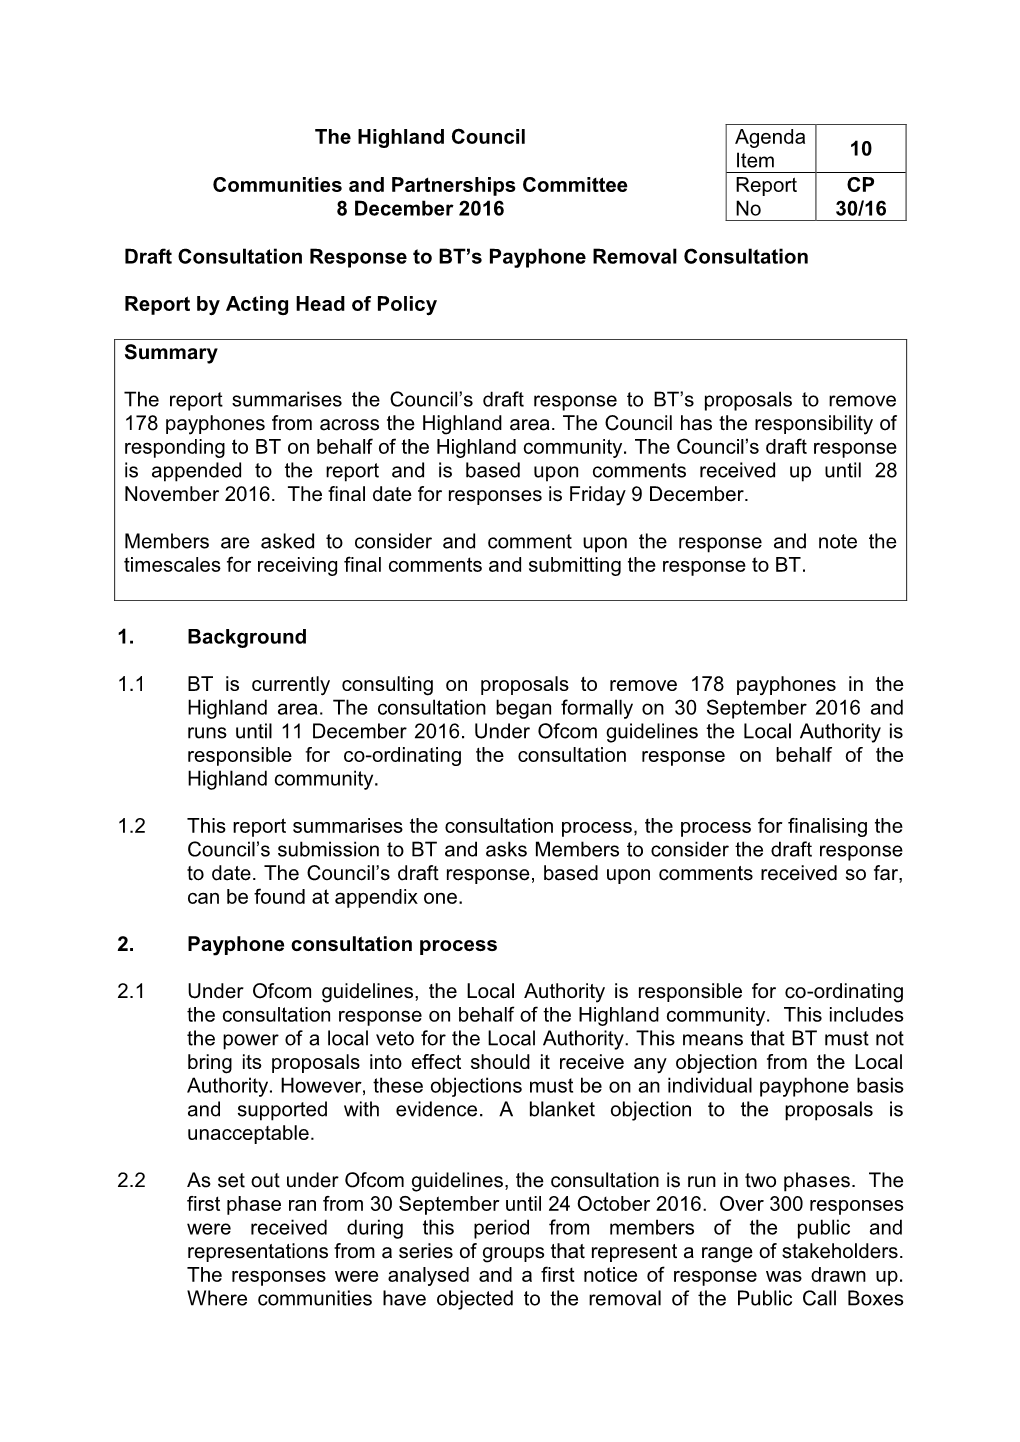 Draft Consultation Response to BT's Payphone Removal Consultation